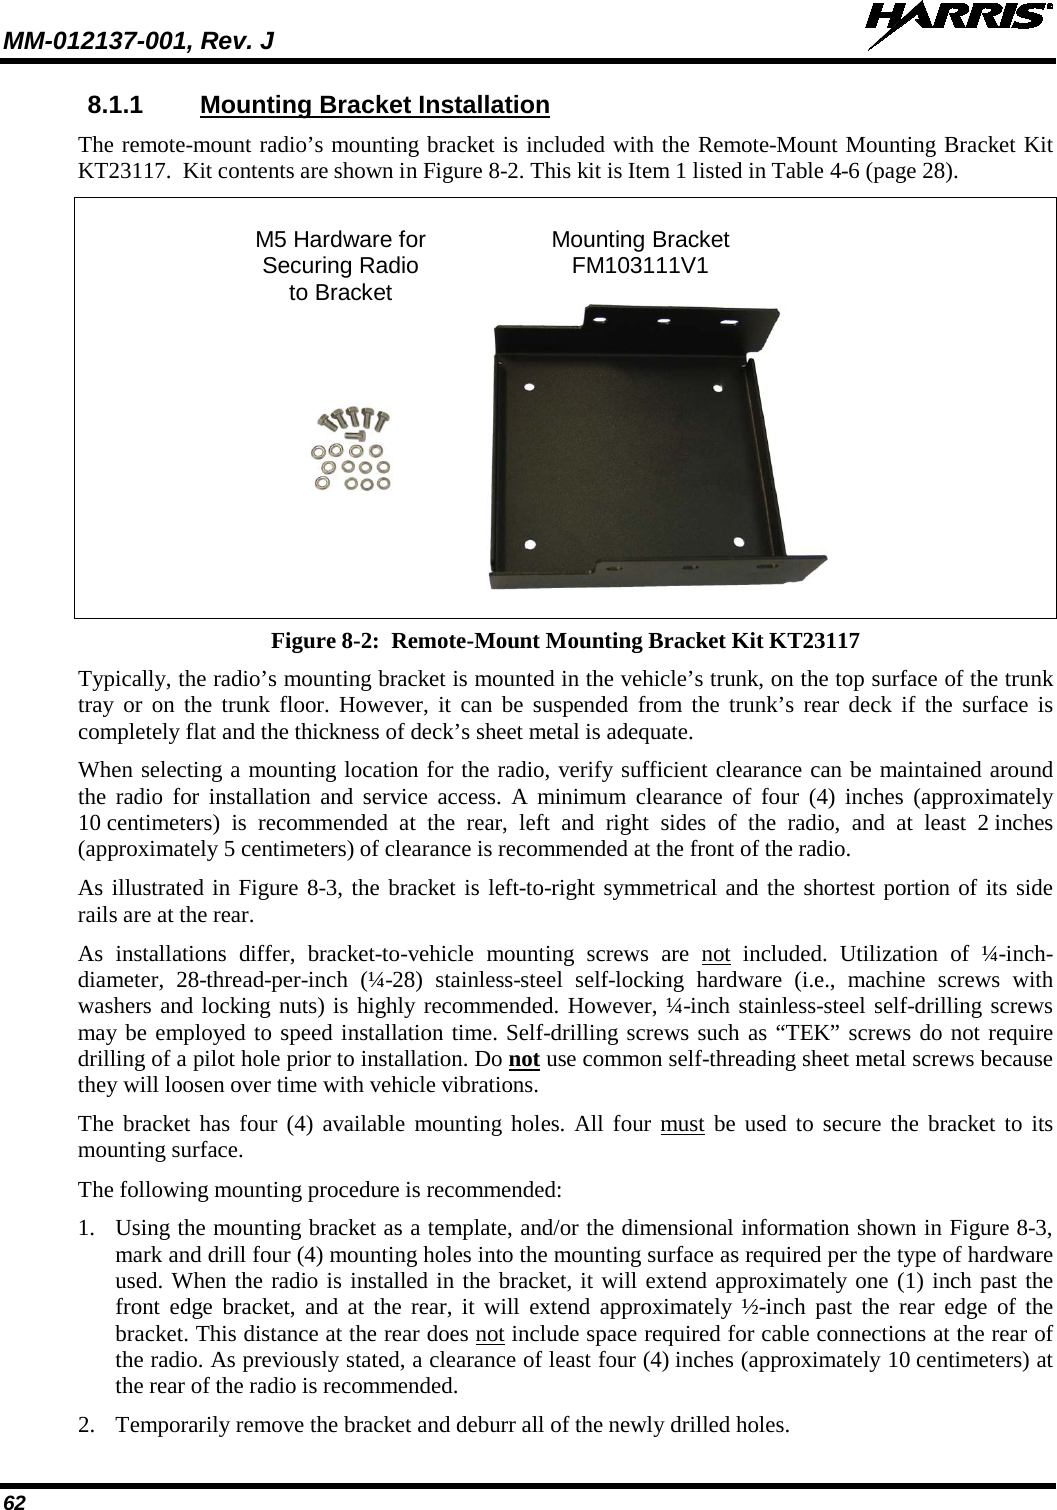 MM-012137-001, Rev. J   62 8.1.1 Mounting Bracket Installation The remote-mount radio’s mounting bracket is included with the Remote-Mount Mounting Bracket Kit KT23117.  Kit contents are shown in Figure 8-2. This kit is Item 1 listed in Table 4-6 (page 28).   M5 Hardware for Mounting Bracket  Securing Radio FM103111V1  to Bracket     Figure 8-2:  Remote-Mount Mounting Bracket Kit KT23117 Typically, the radio’s mounting bracket is mounted in the vehicle’s trunk, on the top surface of the trunk tray or on the trunk floor. However, it can be suspended from the trunk’s rear deck if the surface is completely flat and the thickness of deck’s sheet metal is adequate. When selecting a mounting location for the radio, verify sufficient clearance can be maintained around the radio for installation and service access. A minimum clearance of four (4)  inches (approximately 10 centimeters)  is recommended at the rear,  left and right sides of the radio, and at least 2 inches (approximately 5 centimeters) of clearance is recommended at the front of the radio. As illustrated in Figure 8-3, the bracket is left-to-right symmetrical and the shortest portion of its side rails are at the rear. As installations differ, bracket-to-vehicle mounting screws are not included. Utilization of ¼-inch-diameter, 28-thread-per-inch (¼-28) stainless-steel self-locking hardware (i.e., machine screws with washers and locking nuts) is highly recommended. However, ¼-inch stainless-steel self-drilling screws may be employed to speed installation time. Self-drilling screws such as “TEK” screws do not require drilling of a pilot hole prior to installation. Do not use common self-threading sheet metal screws because they will loosen over time with vehicle vibrations. The bracket has four (4) available mounting holes. All four must be used to secure the bracket to its mounting surface. The following mounting procedure is recommended: 1. Using the mounting bracket as a template, and/or the dimensional information shown in Figure 8-3, mark and drill four (4) mounting holes into the mounting surface as required per the type of hardware used. When the radio is installed in the bracket, it will extend approximately one (1) inch past the front edge bracket, and at the rear, it will extend approximately ½-inch past the rear edge of the bracket. This distance at the rear does not include space required for cable connections at the rear of the radio. As previously stated, a clearance of least four (4) inches (approximately 10 centimeters) at the rear of the radio is recommended. 2. Temporarily remove the bracket and deburr all of the newly drilled holes. 